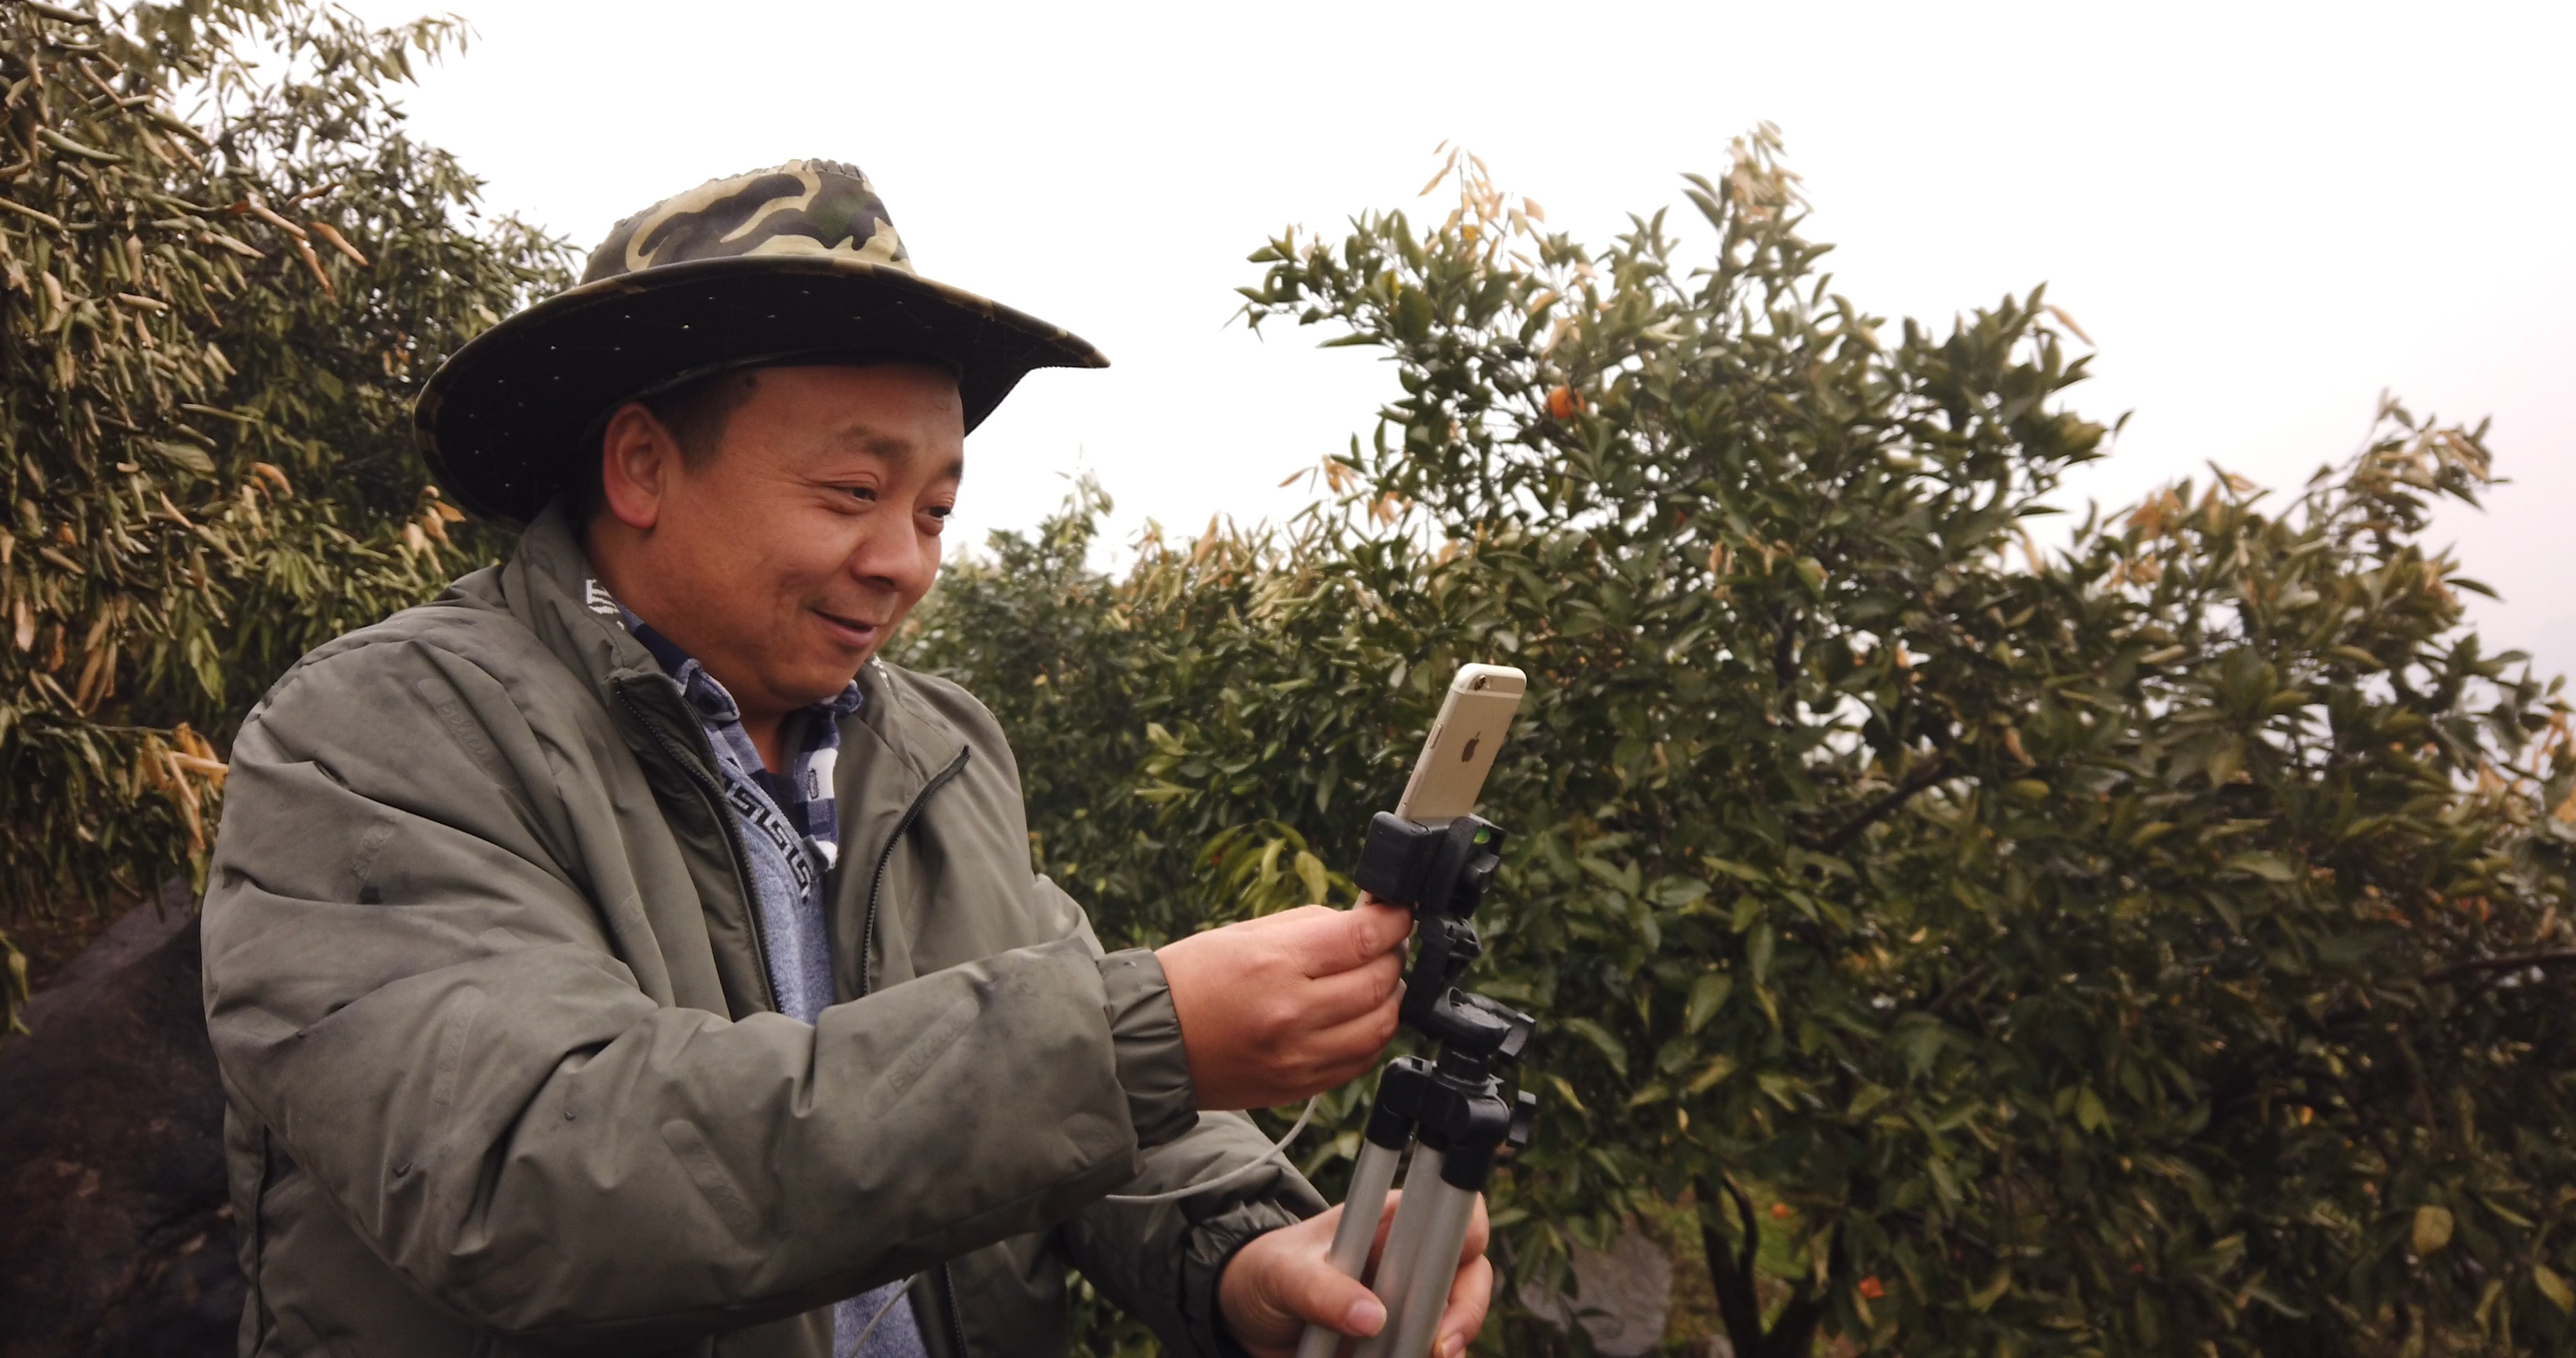 Zhong Haihui, a fruit farmer from central China's Hunan province, uses an iPhone 6, a small tripod and a power bank when live-streaming video for short video app operator Kuaishou and e-commerce platform Taobao Marketplace. Photo: Chris Chang